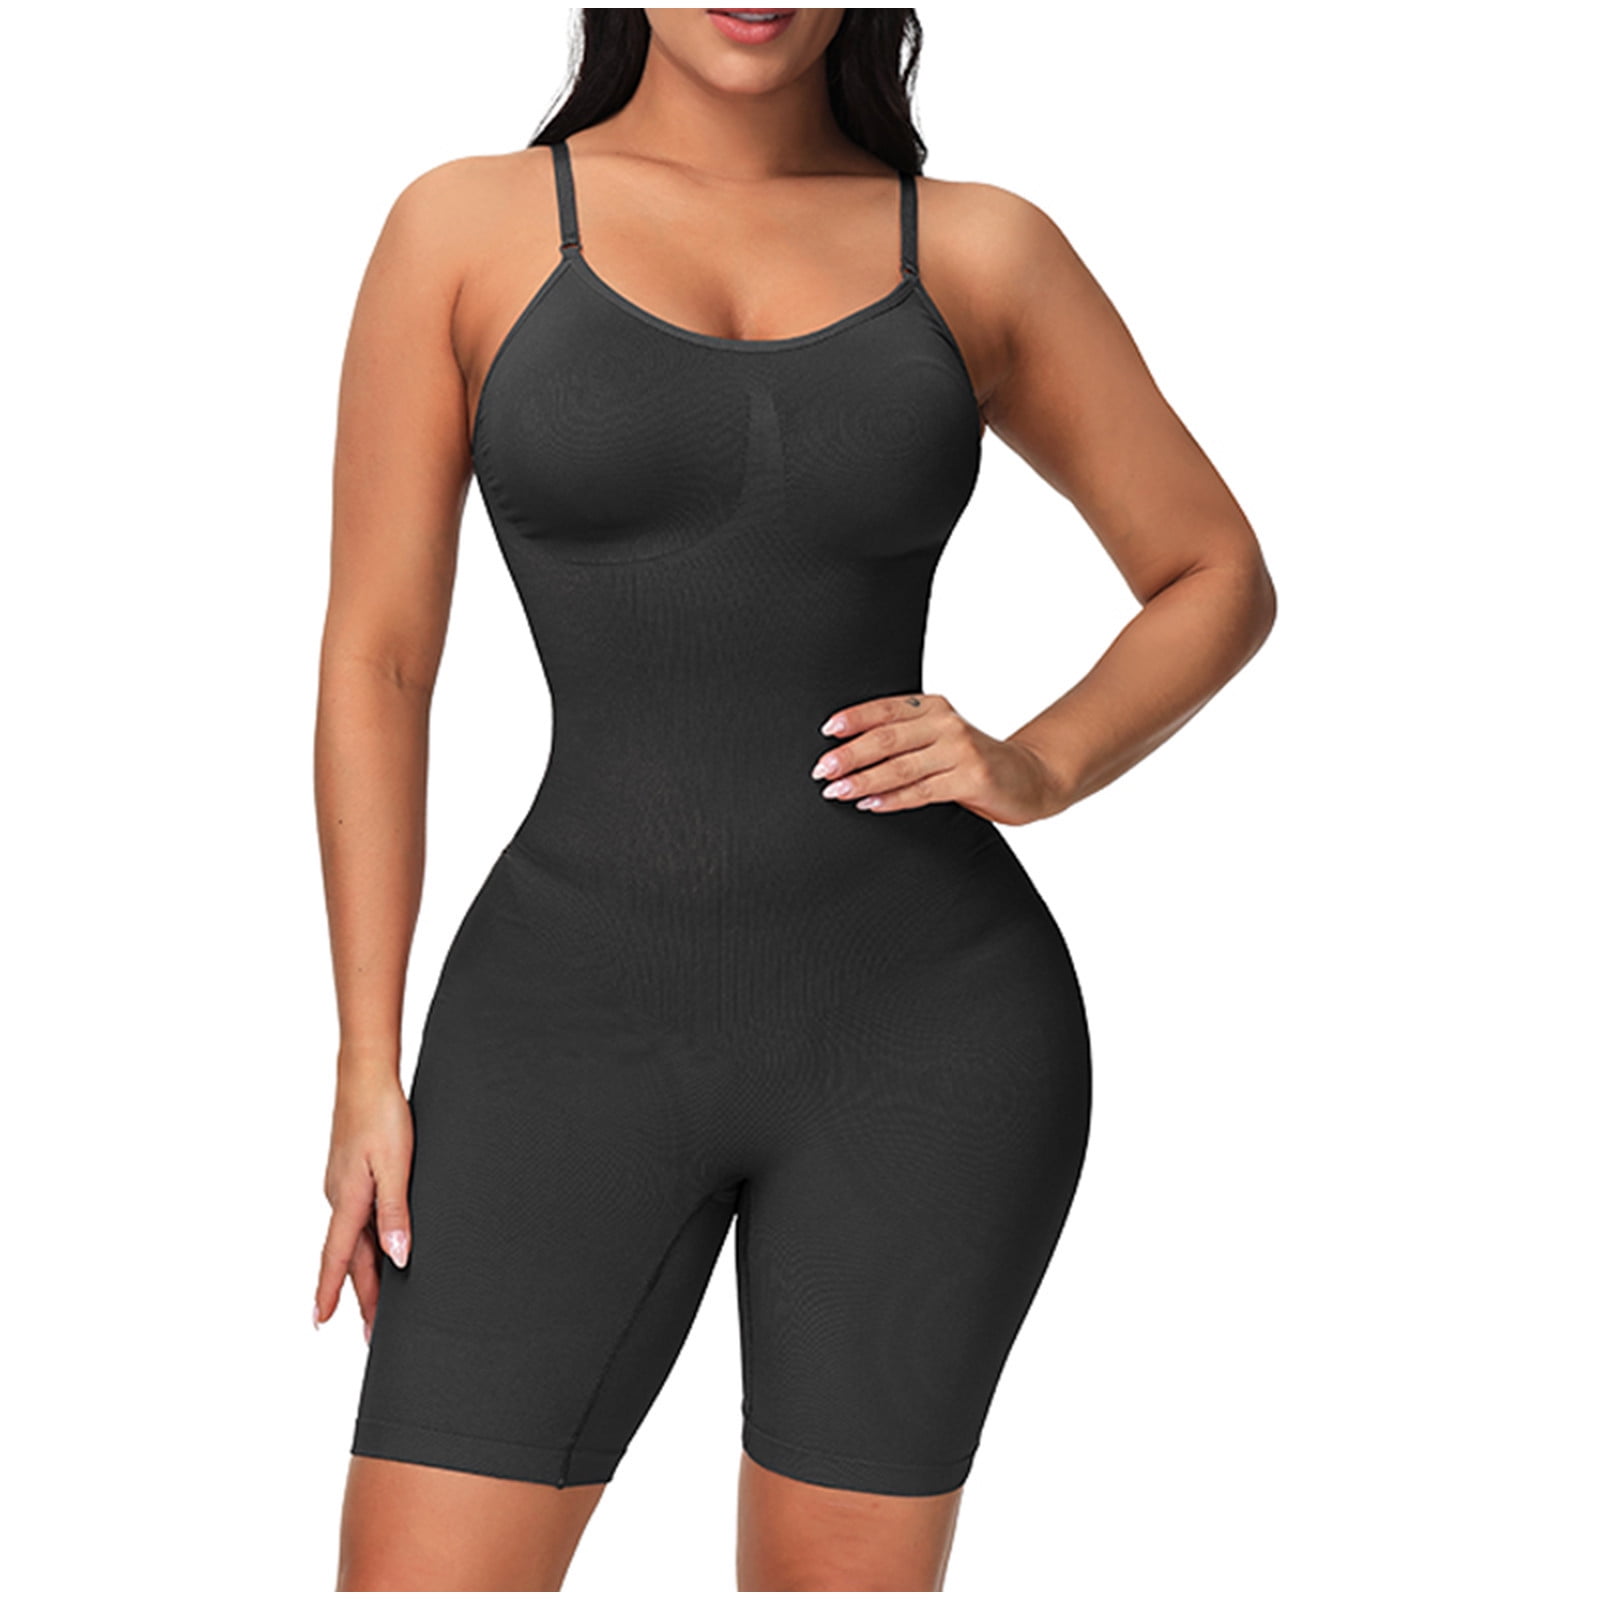  WANGPIN Skims Shapewear for Women Volcanic Energy Stone Bodysuit  Compression Shirt Seamless Open Crotch Full Body Shaper (Color : Skin, Size  : XXL/XX-Large) : Clothing, Shoes & Jewelry